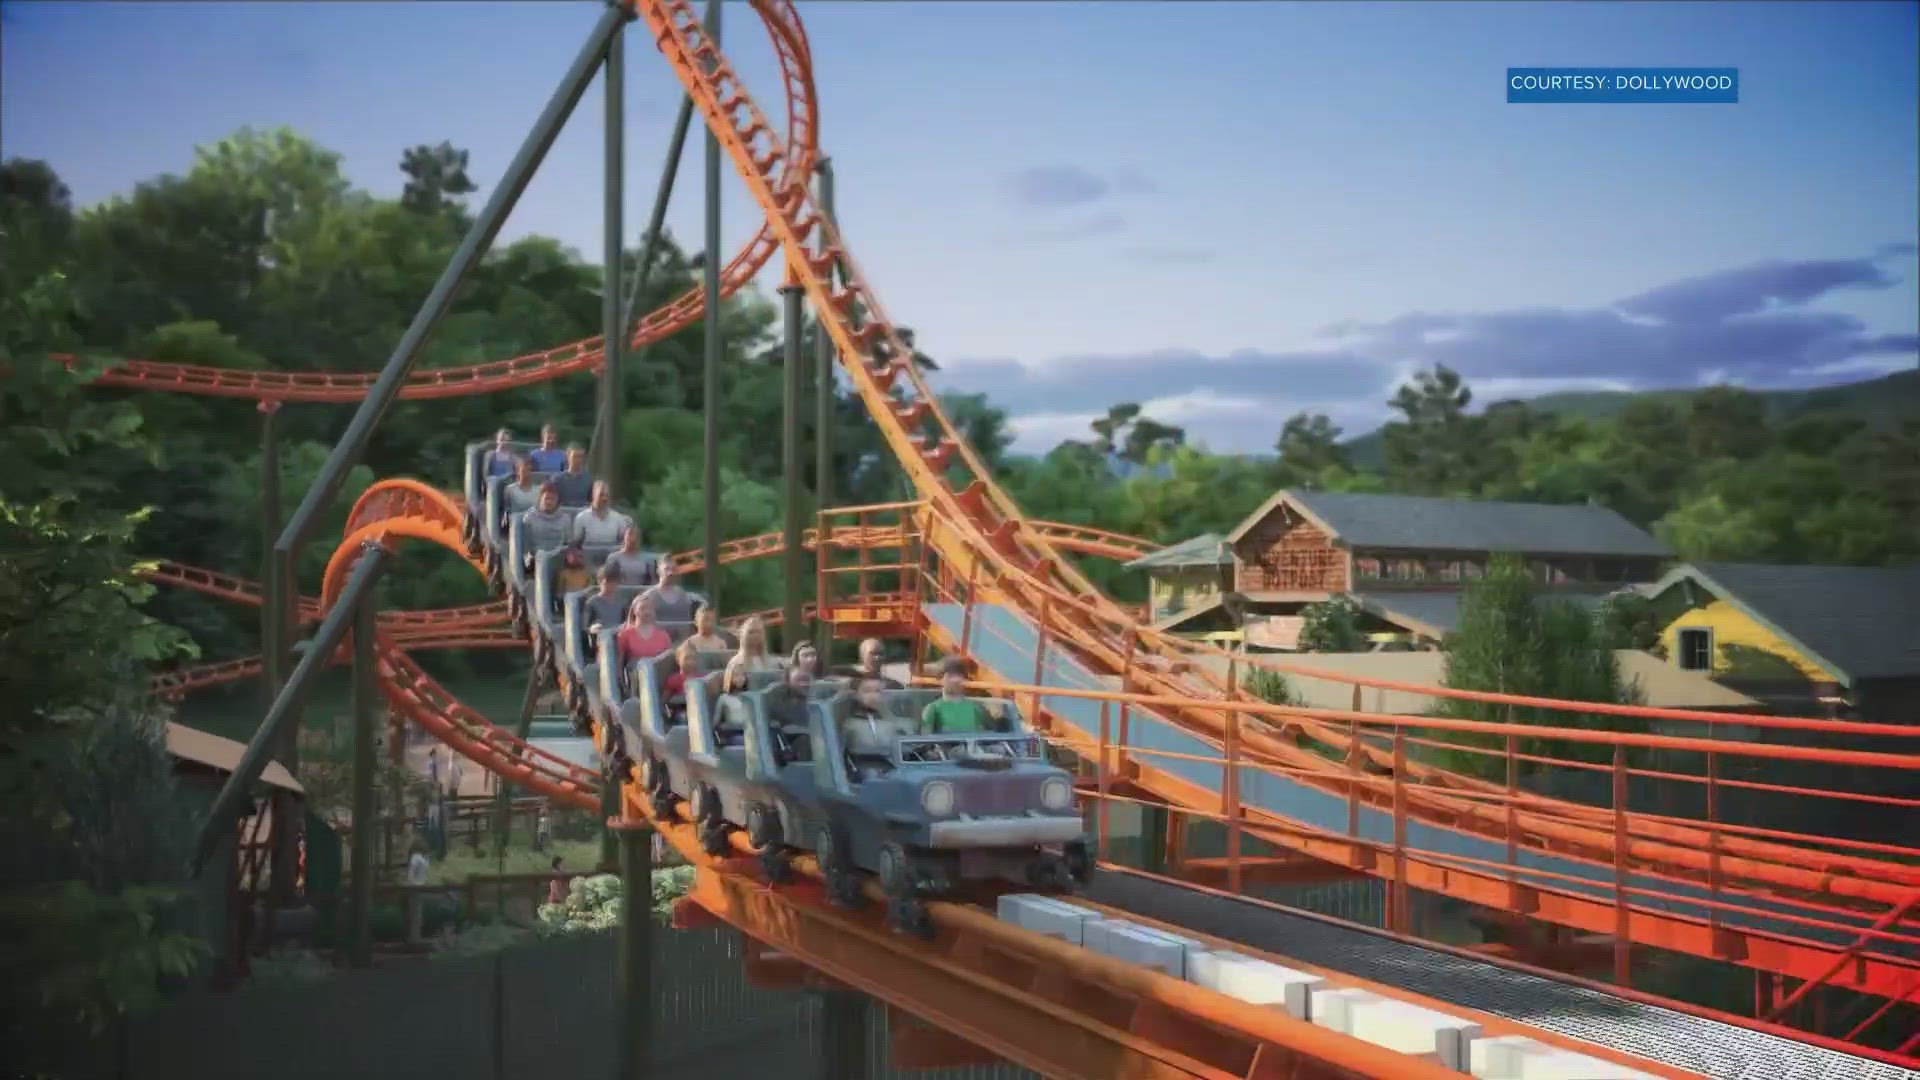 "Big Bear Mountain" is Dollywood's newest and longest roller coaster.